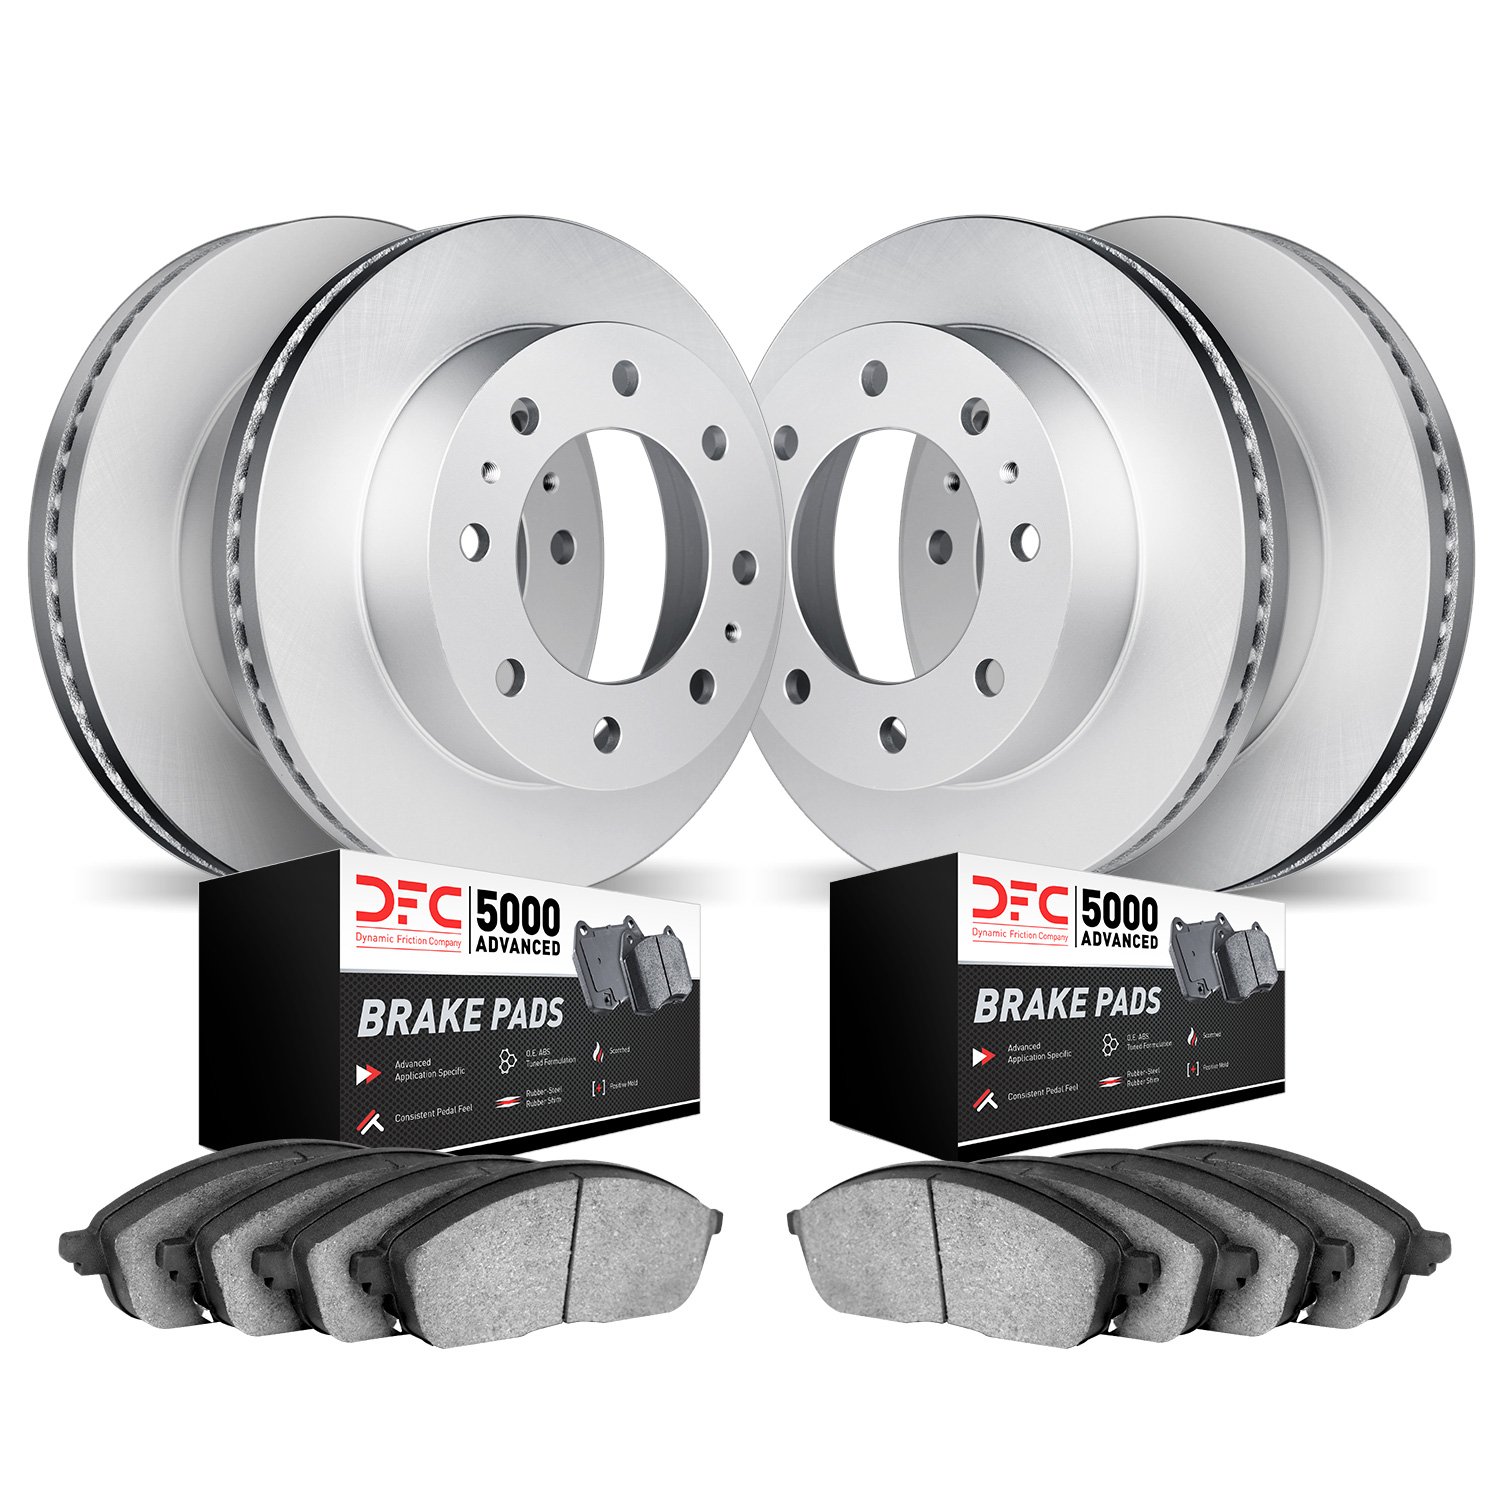 4504-54092 Geospec Brake Rotors w/5000 Advanced Brake Pads Kit, Fits Select Ford/Lincoln/Mercury/Mazda, Position: Front and Rear